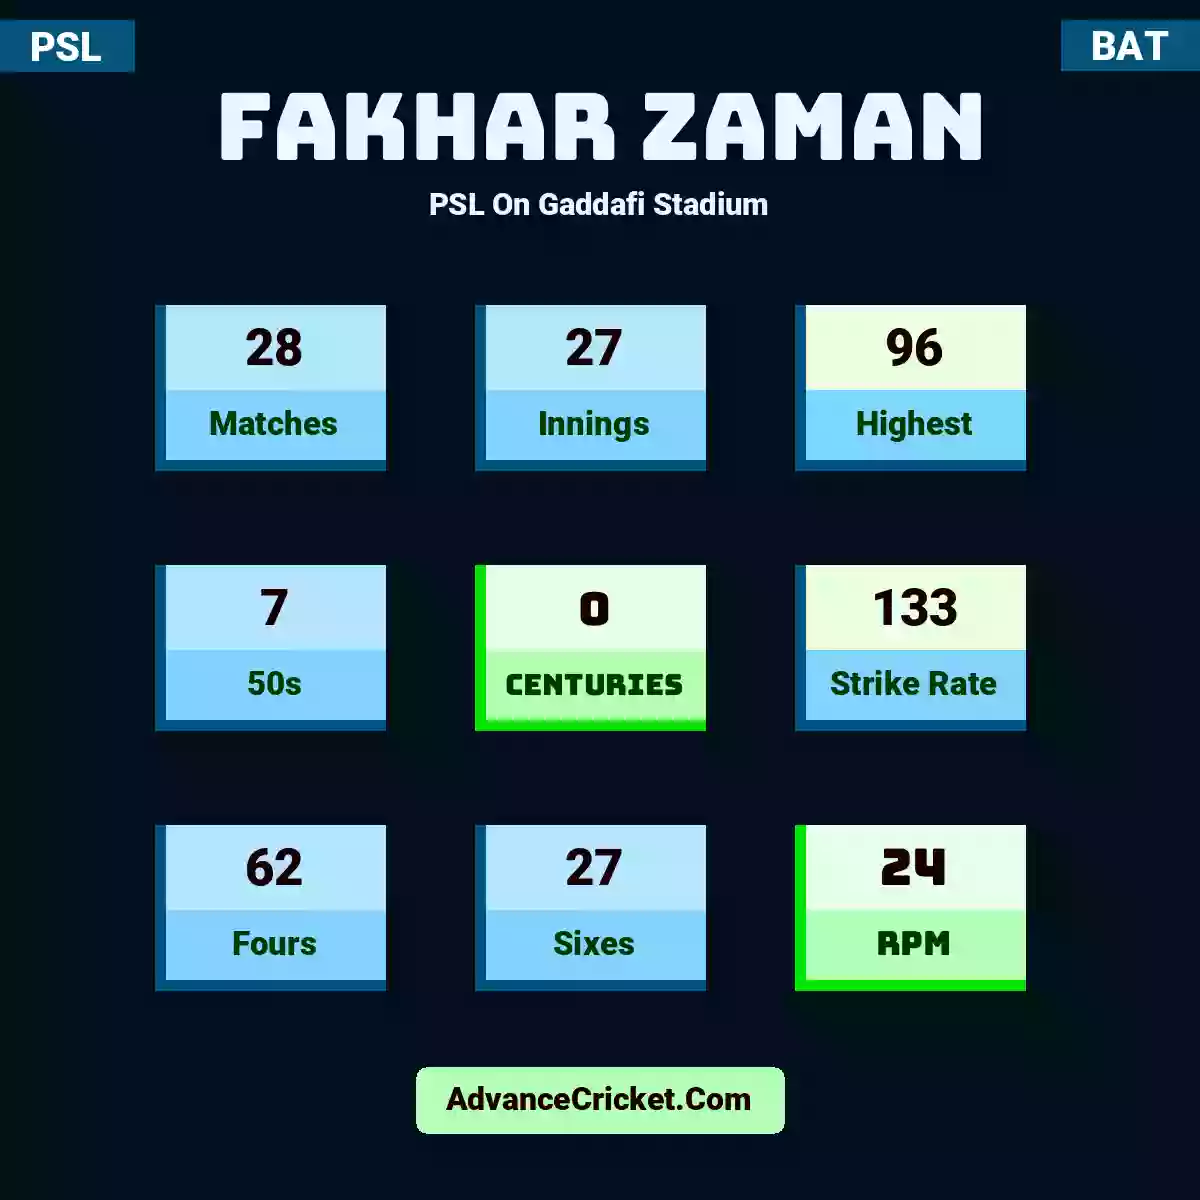 Fakhar Zaman PSL  On Gaddafi Stadium, Fakhar Zaman played 28 matches, scored 96 runs as highest, 7 half-centuries, and 0 centuries, with a strike rate of 133. F.Zaman hit 62 fours and 27 sixes, with an RPM of 24.